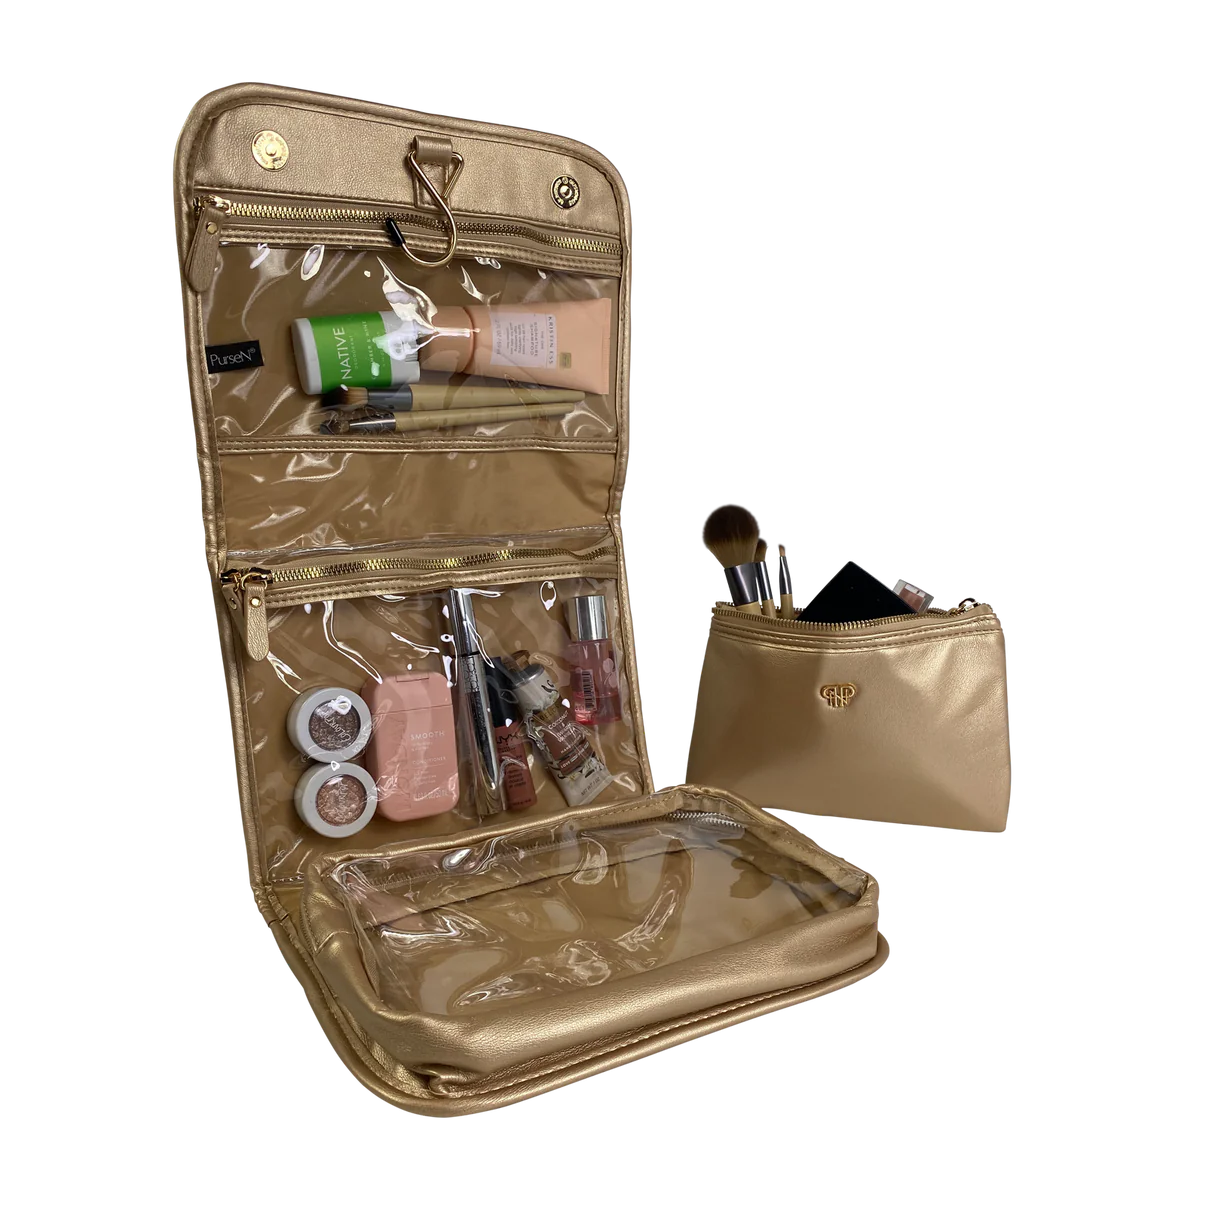 Getaway Toiletry Case - Gold Luster